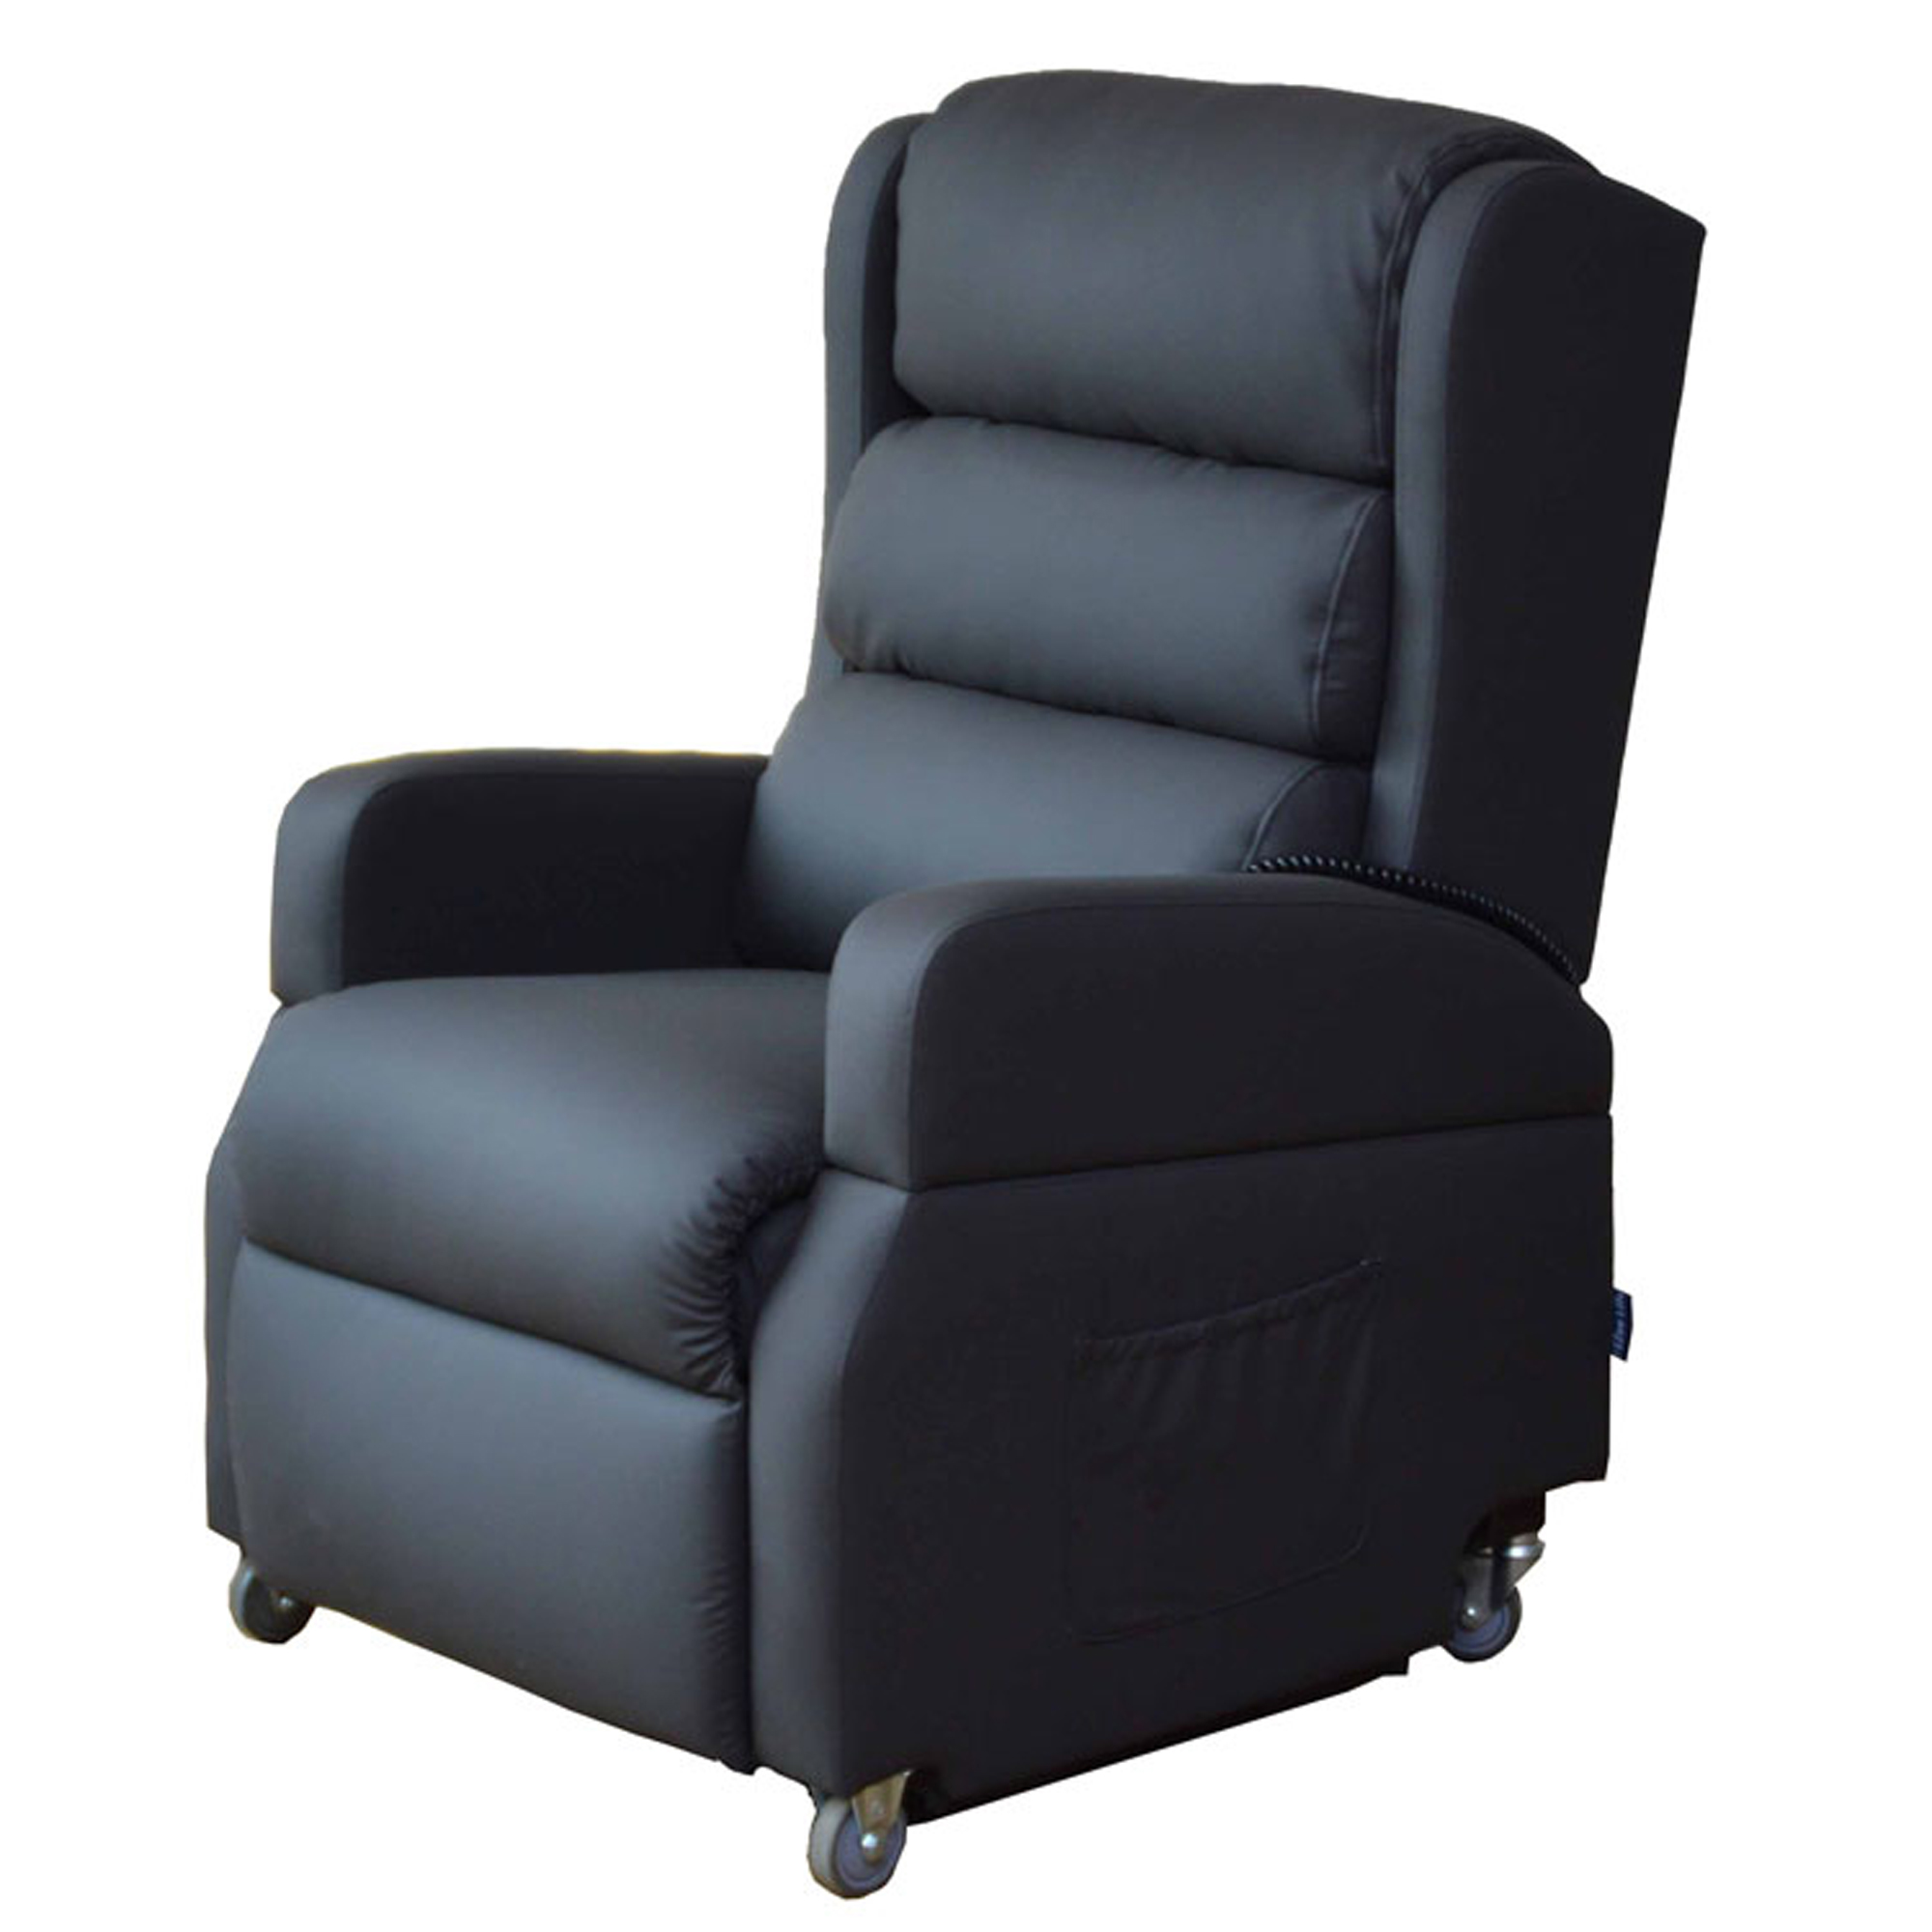 CH4012 Earth Lift Chair Image